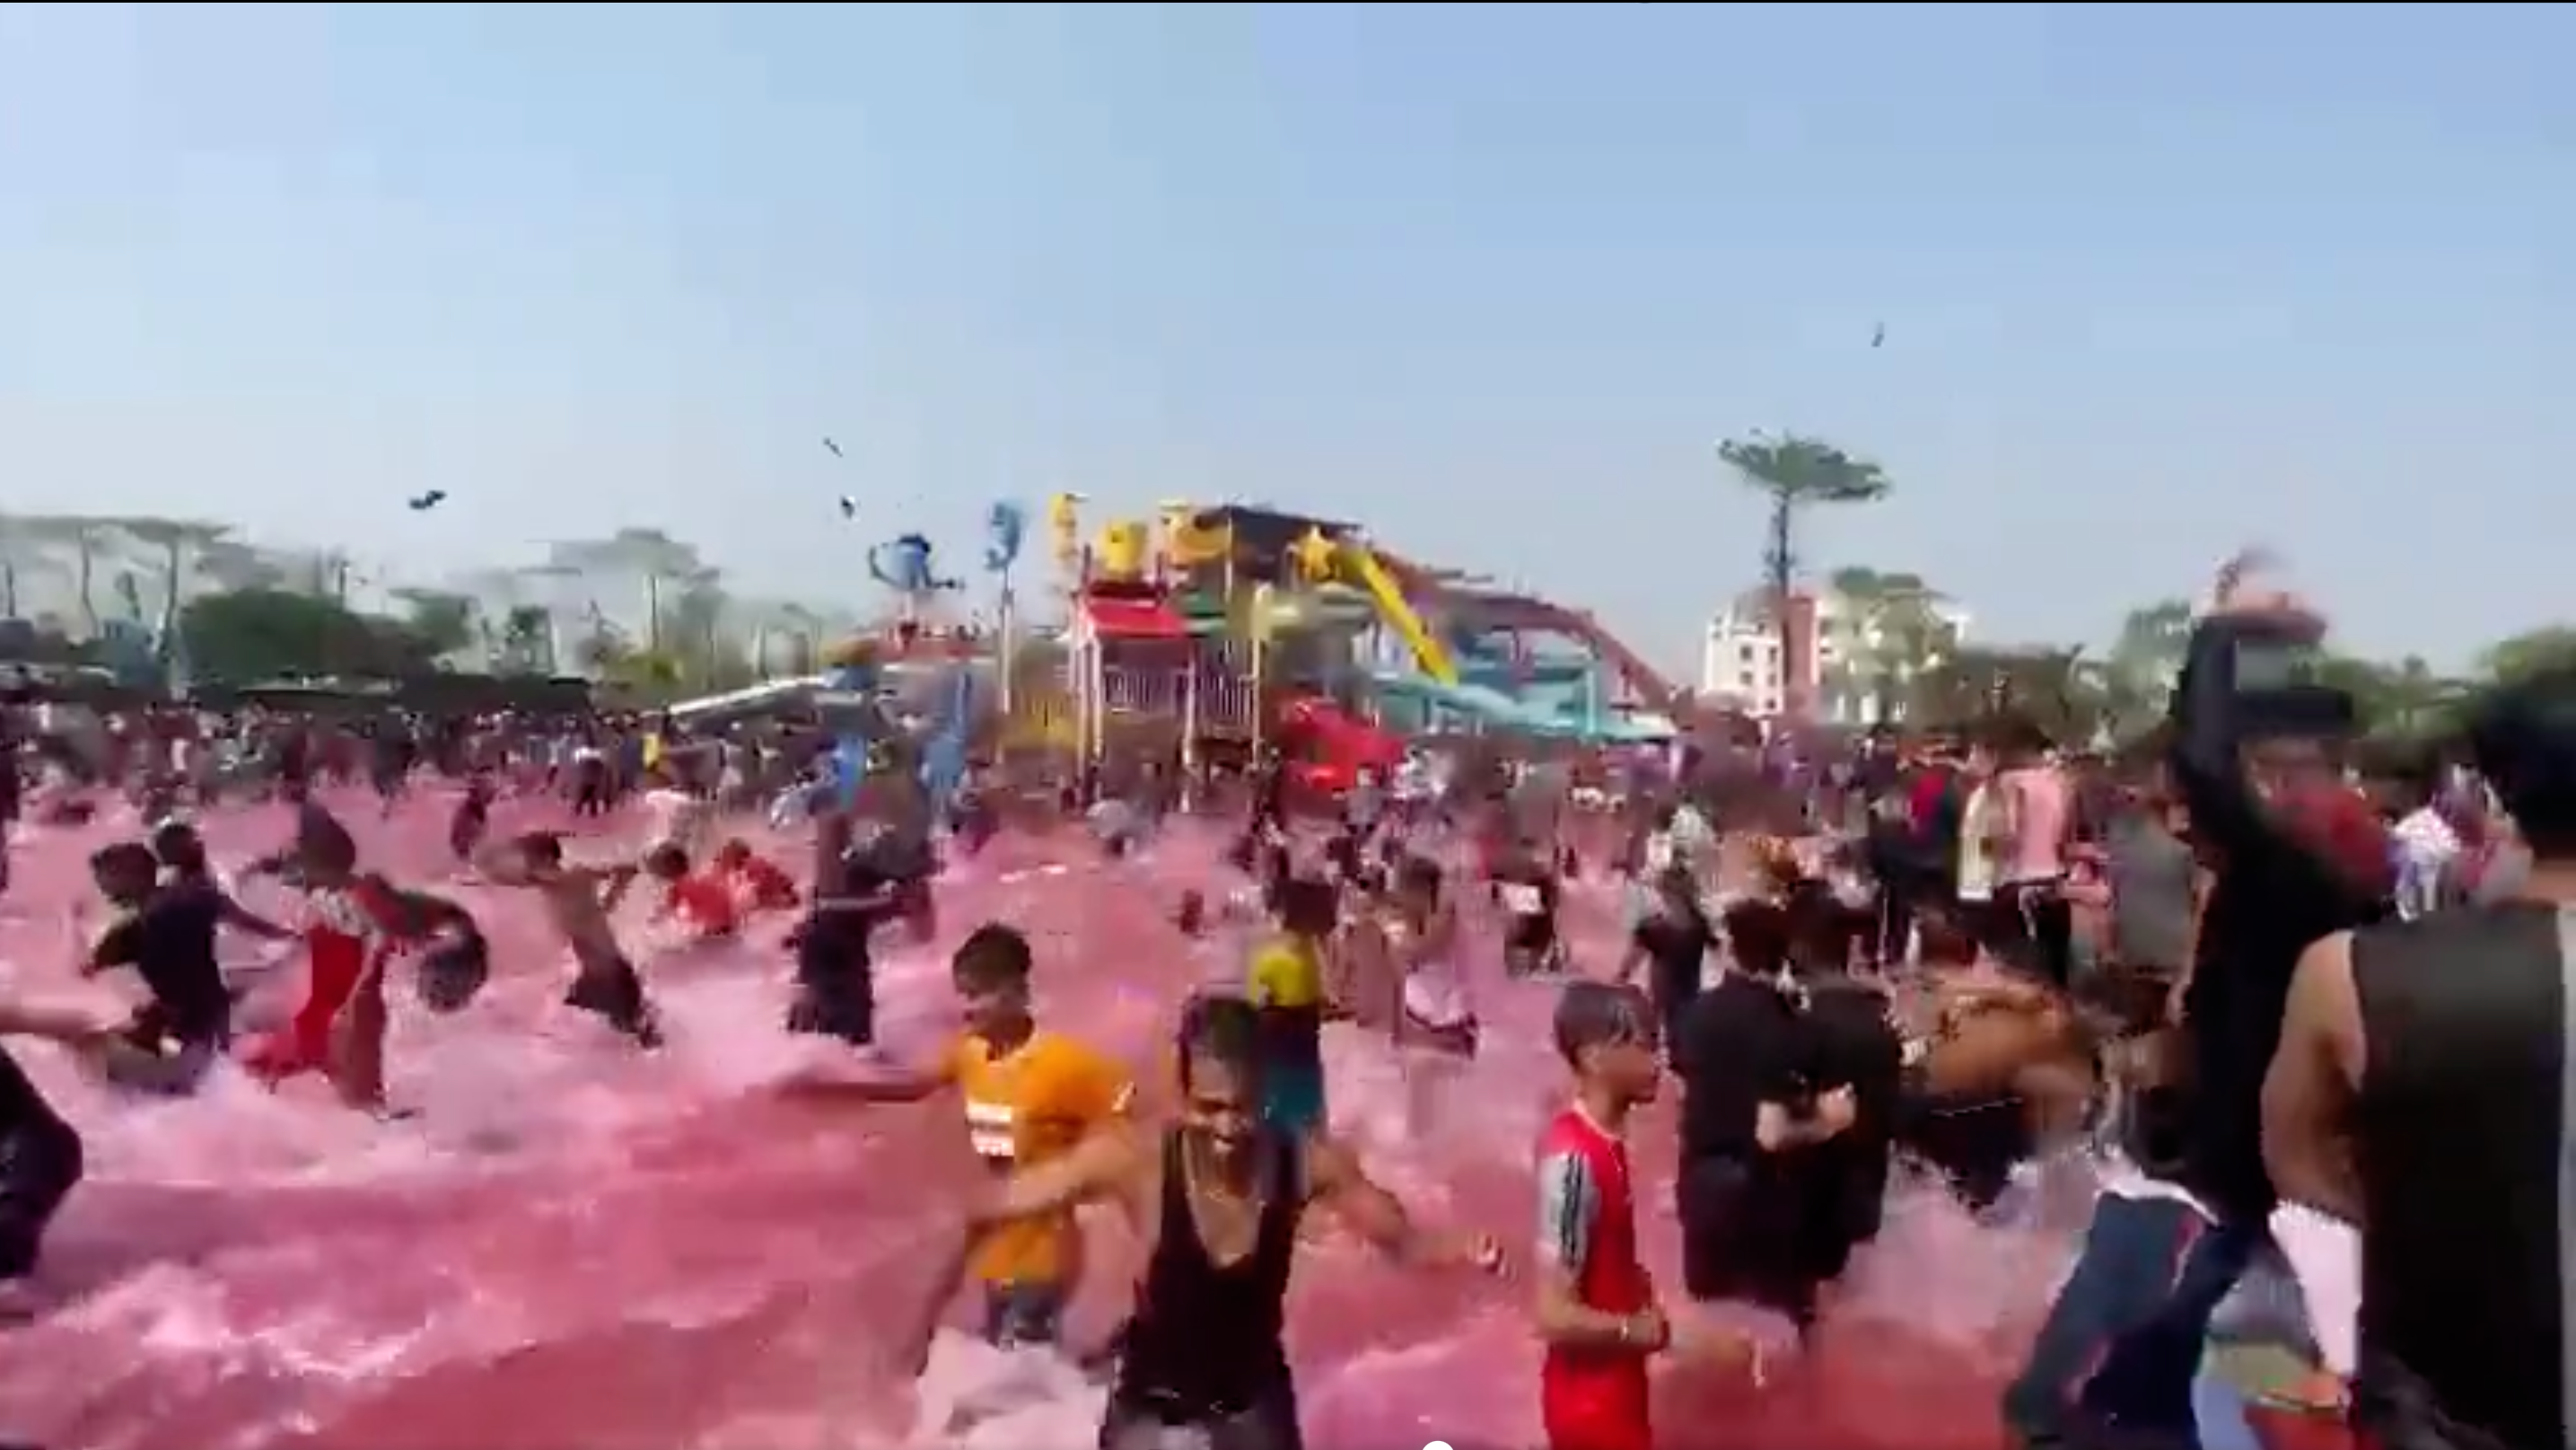 Revellers in Patna throw footwear at each other in Holi celebration | Image: Twitter